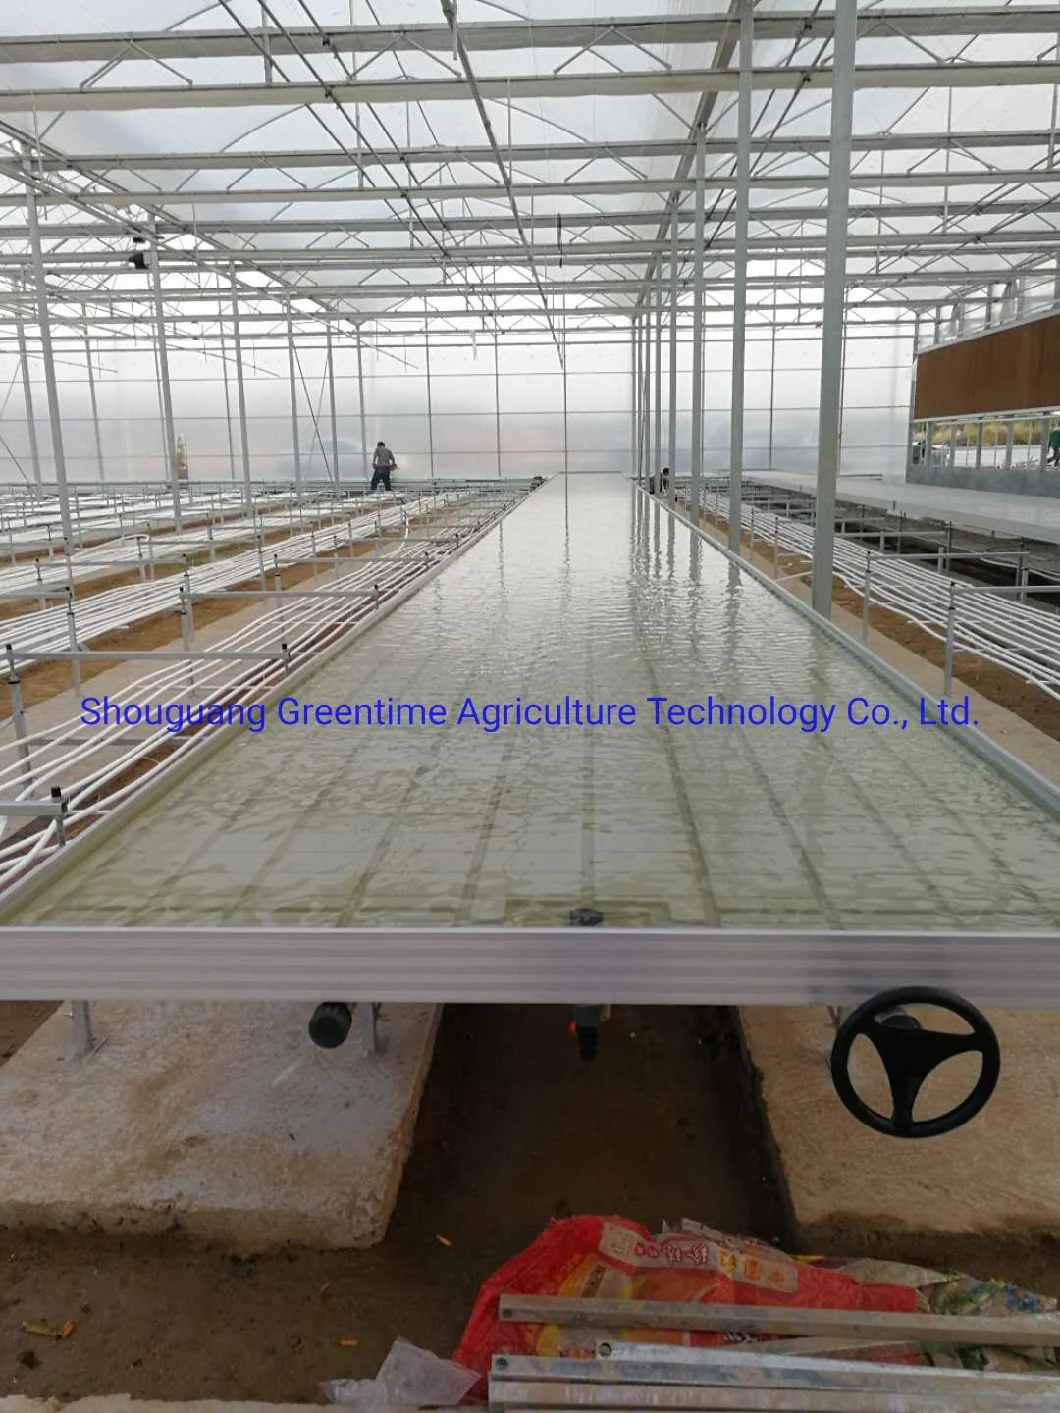 Rolling Benches Double for Agricultural Planting for Agricultural Planting